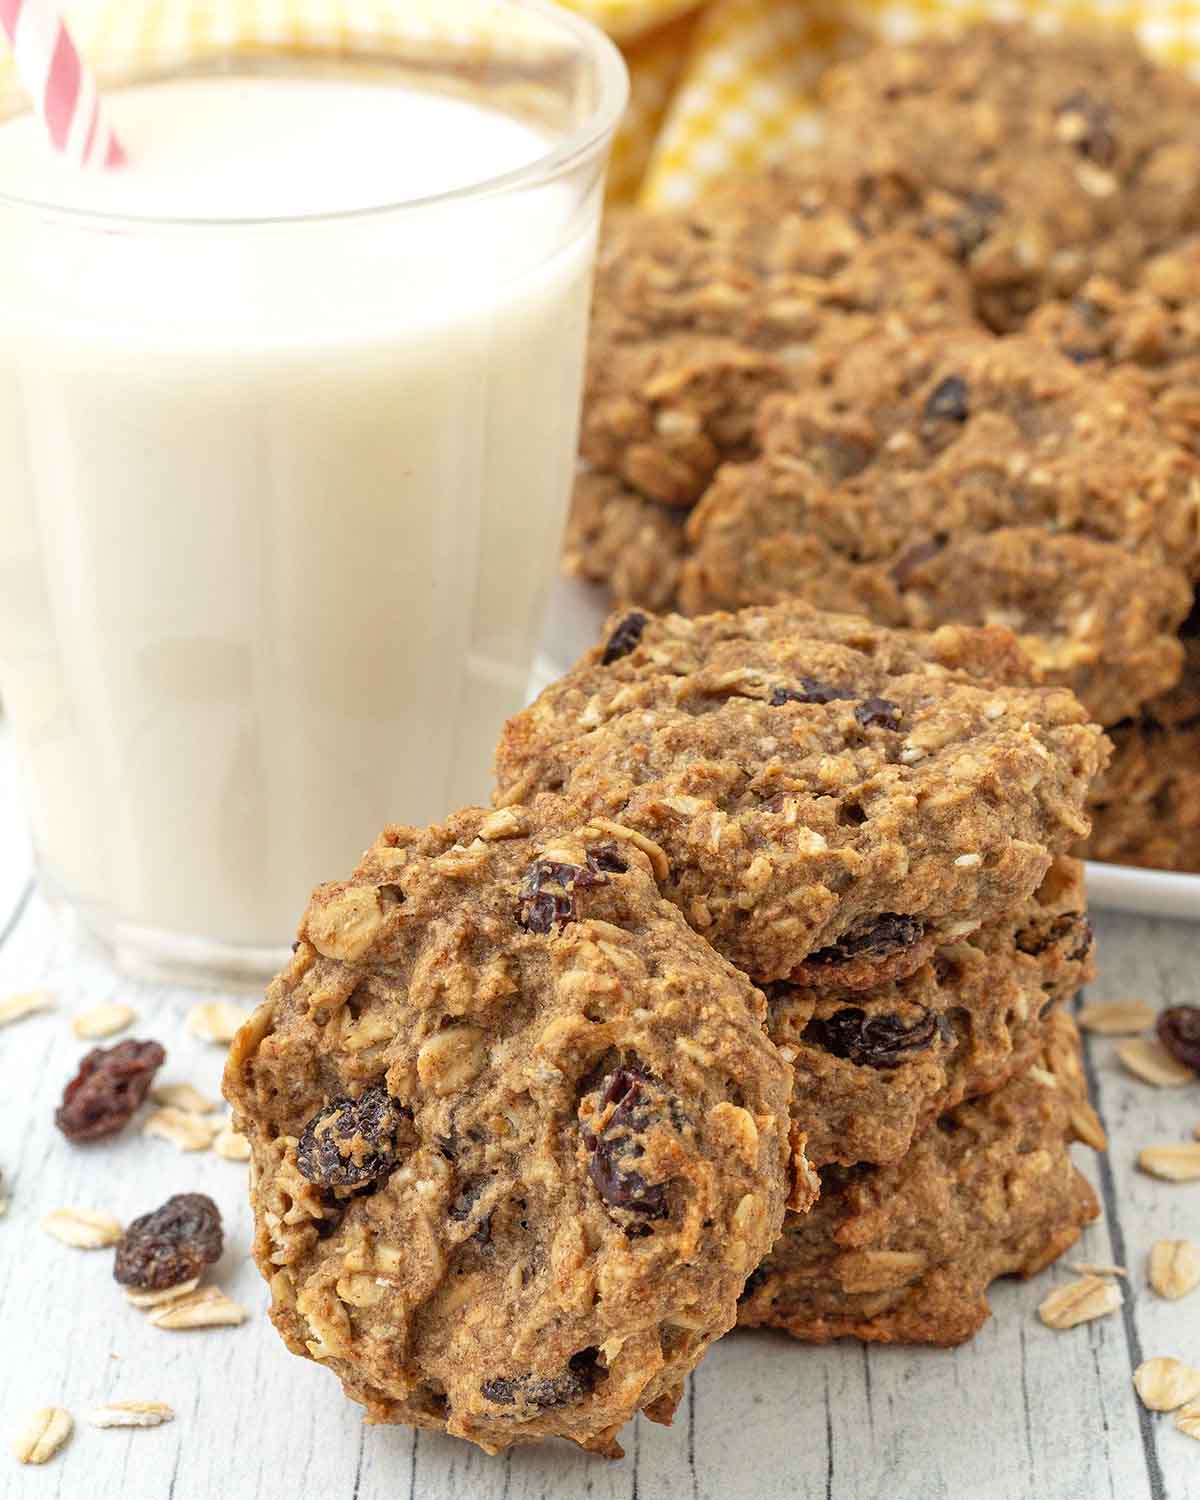 A stack of three oatmeal breakfast cookies, one cookie is leaning against the stack.